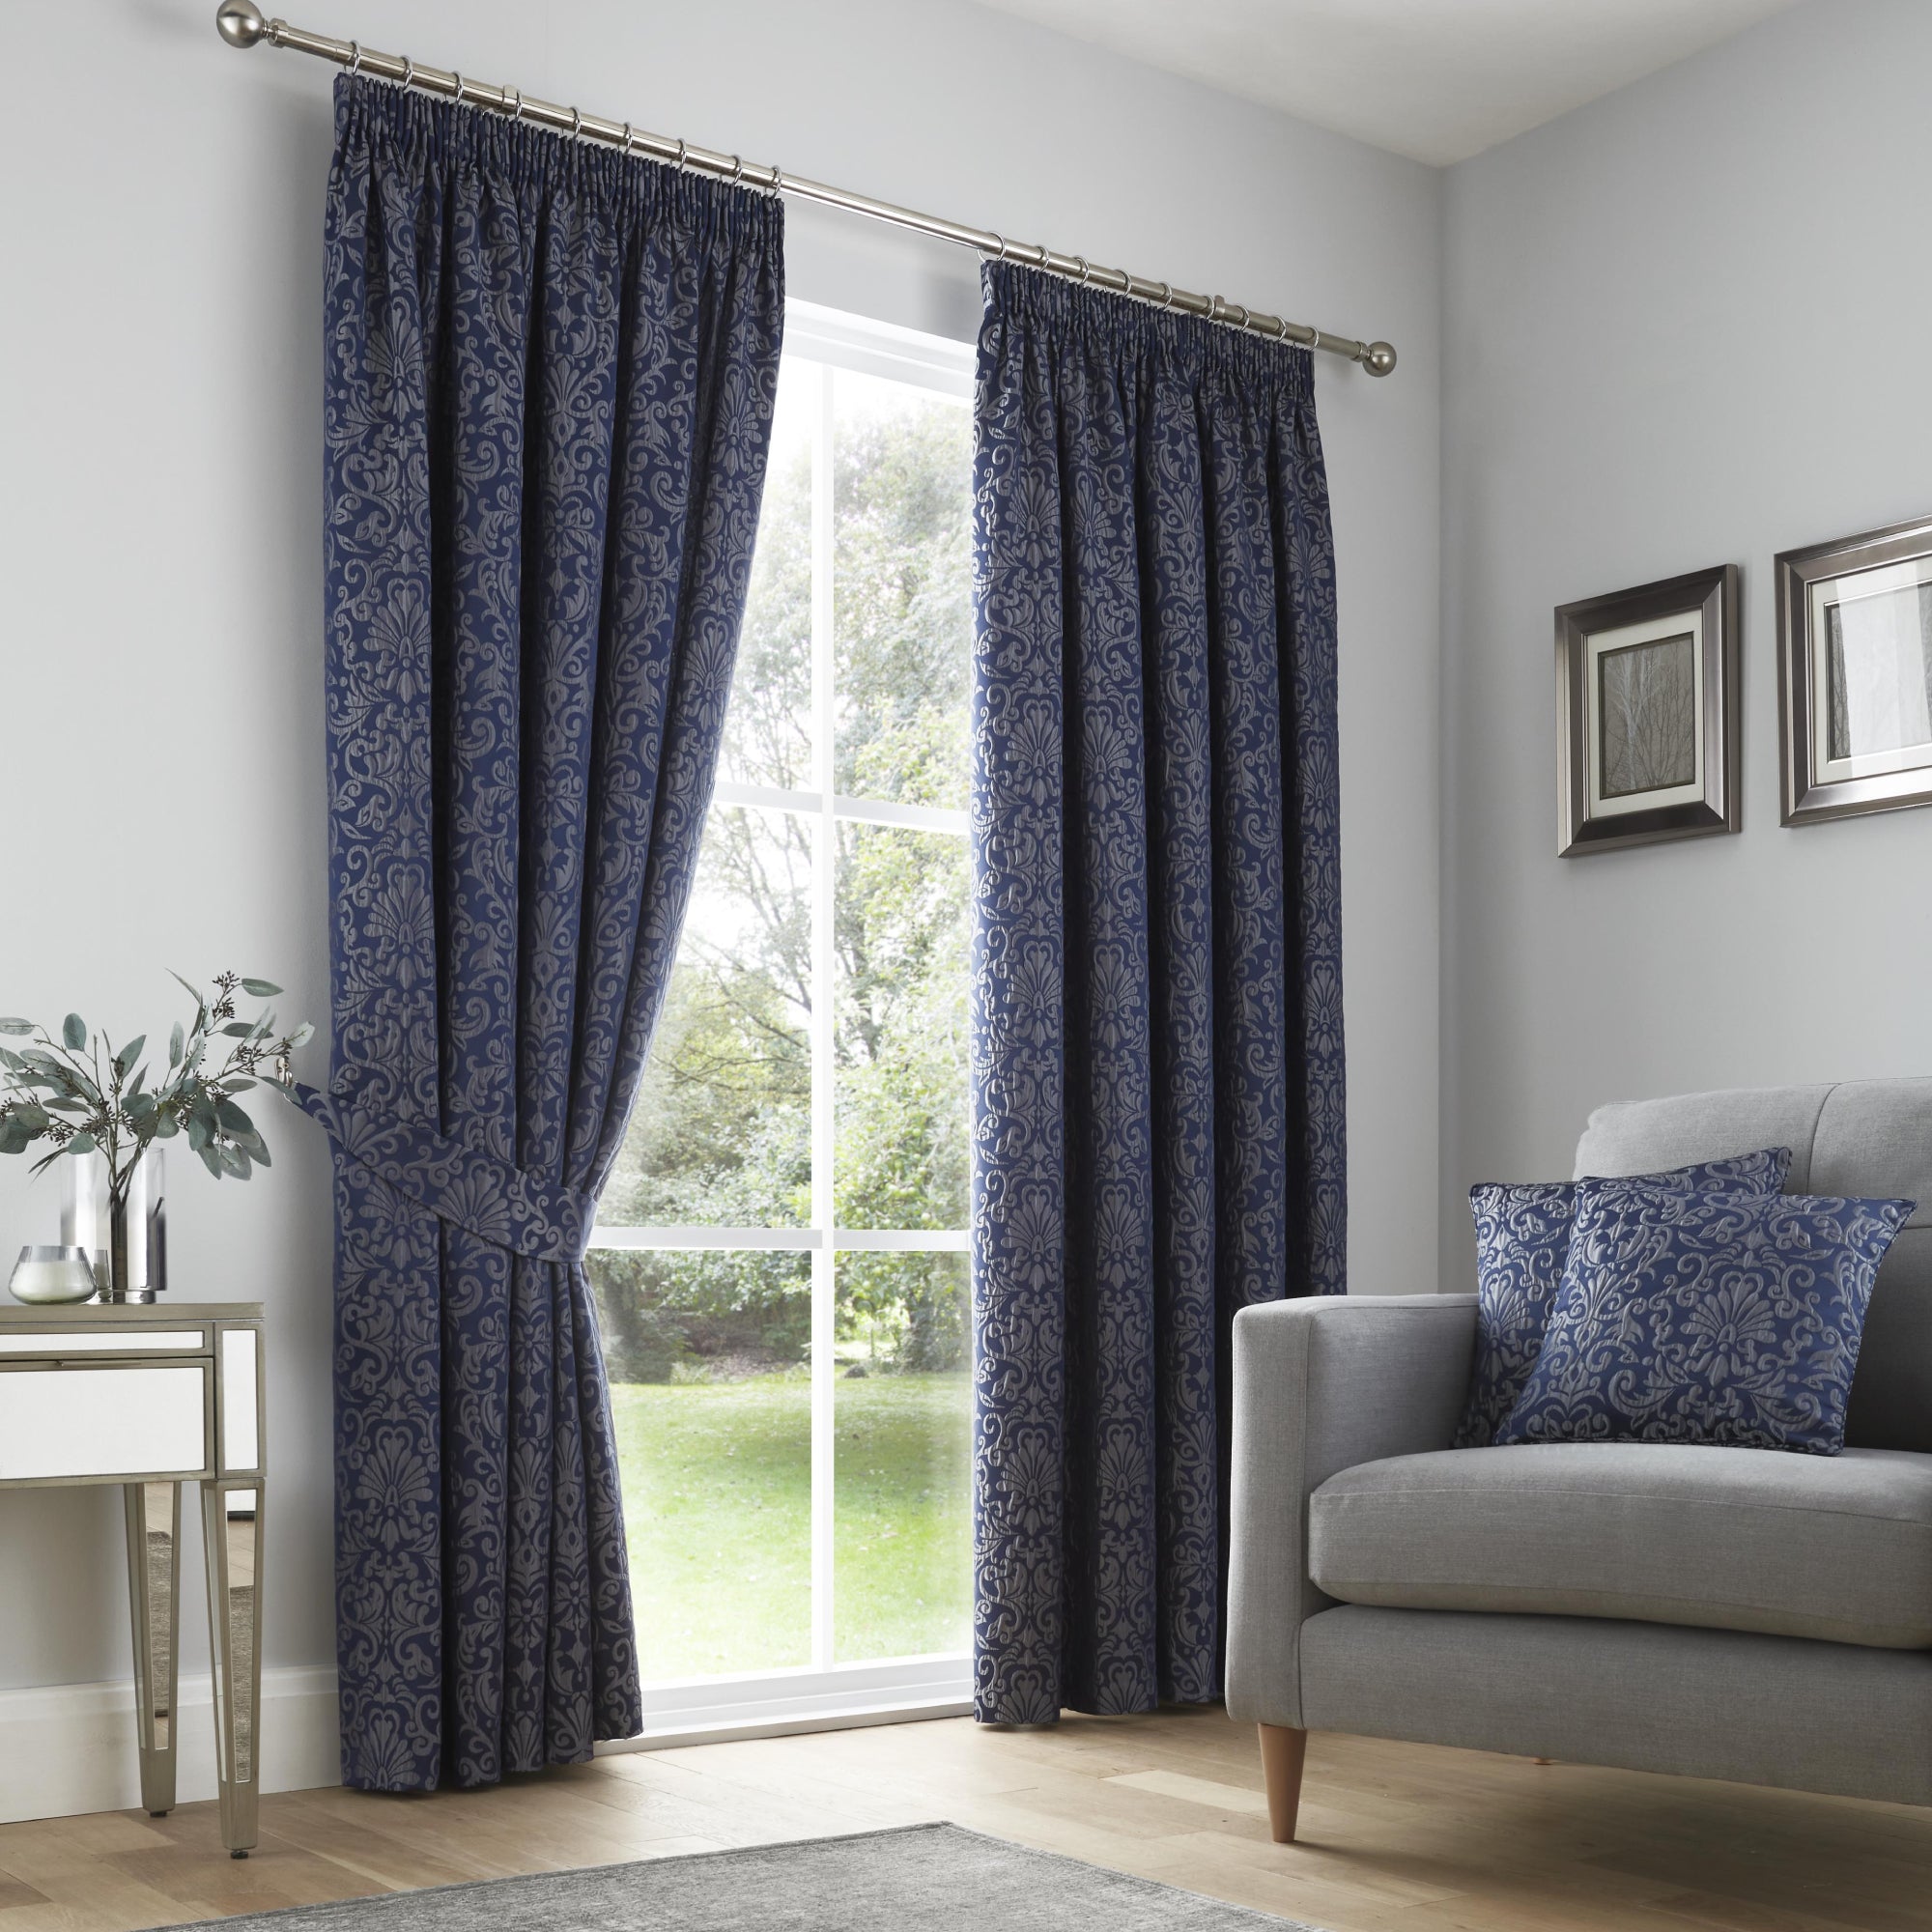 Pair of Pencil Pleat Curtains Lamina by Curtina in Navy